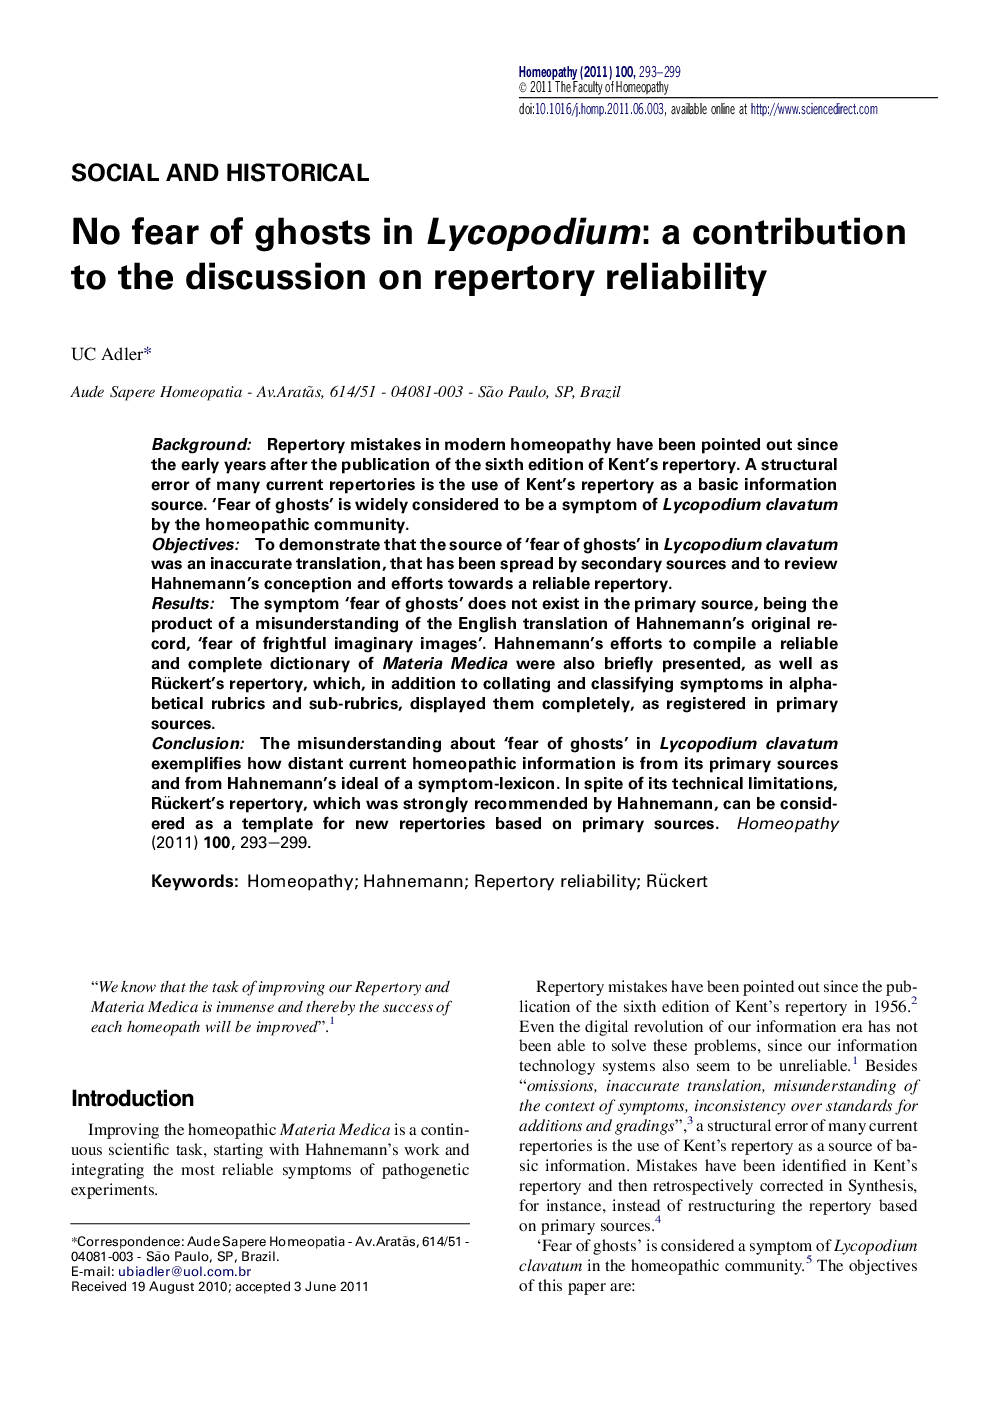 No fear of ghosts in Lycopodium: a contribution to the discussion on repertory reliability